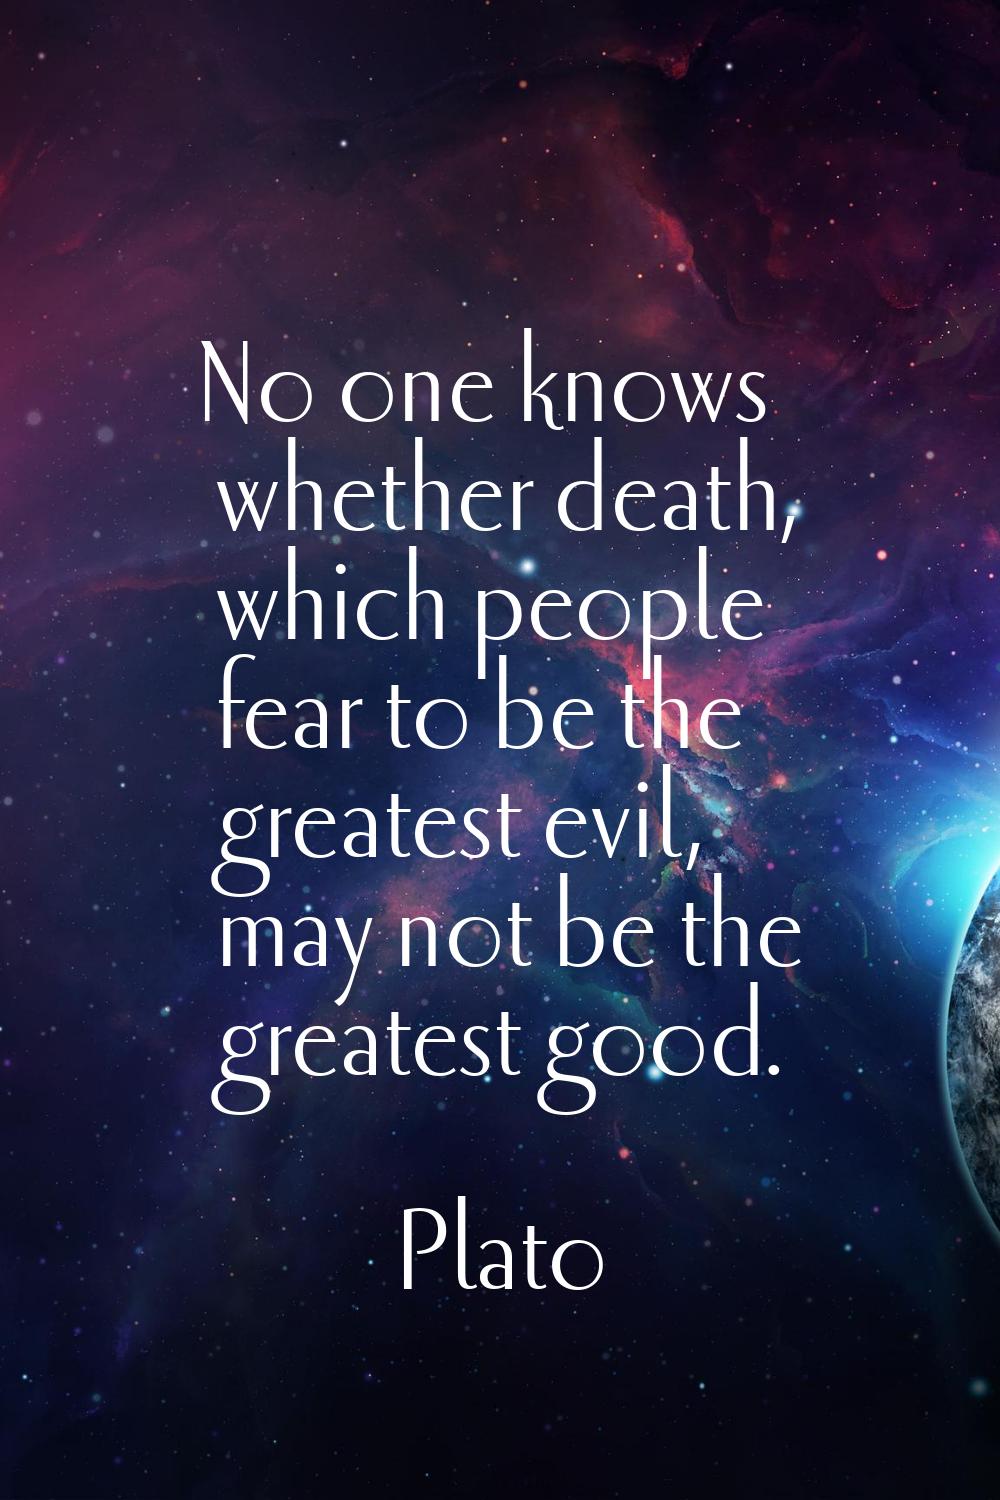 No one knows whether death, which people fear to be the greatest evil, may not be the greatest good